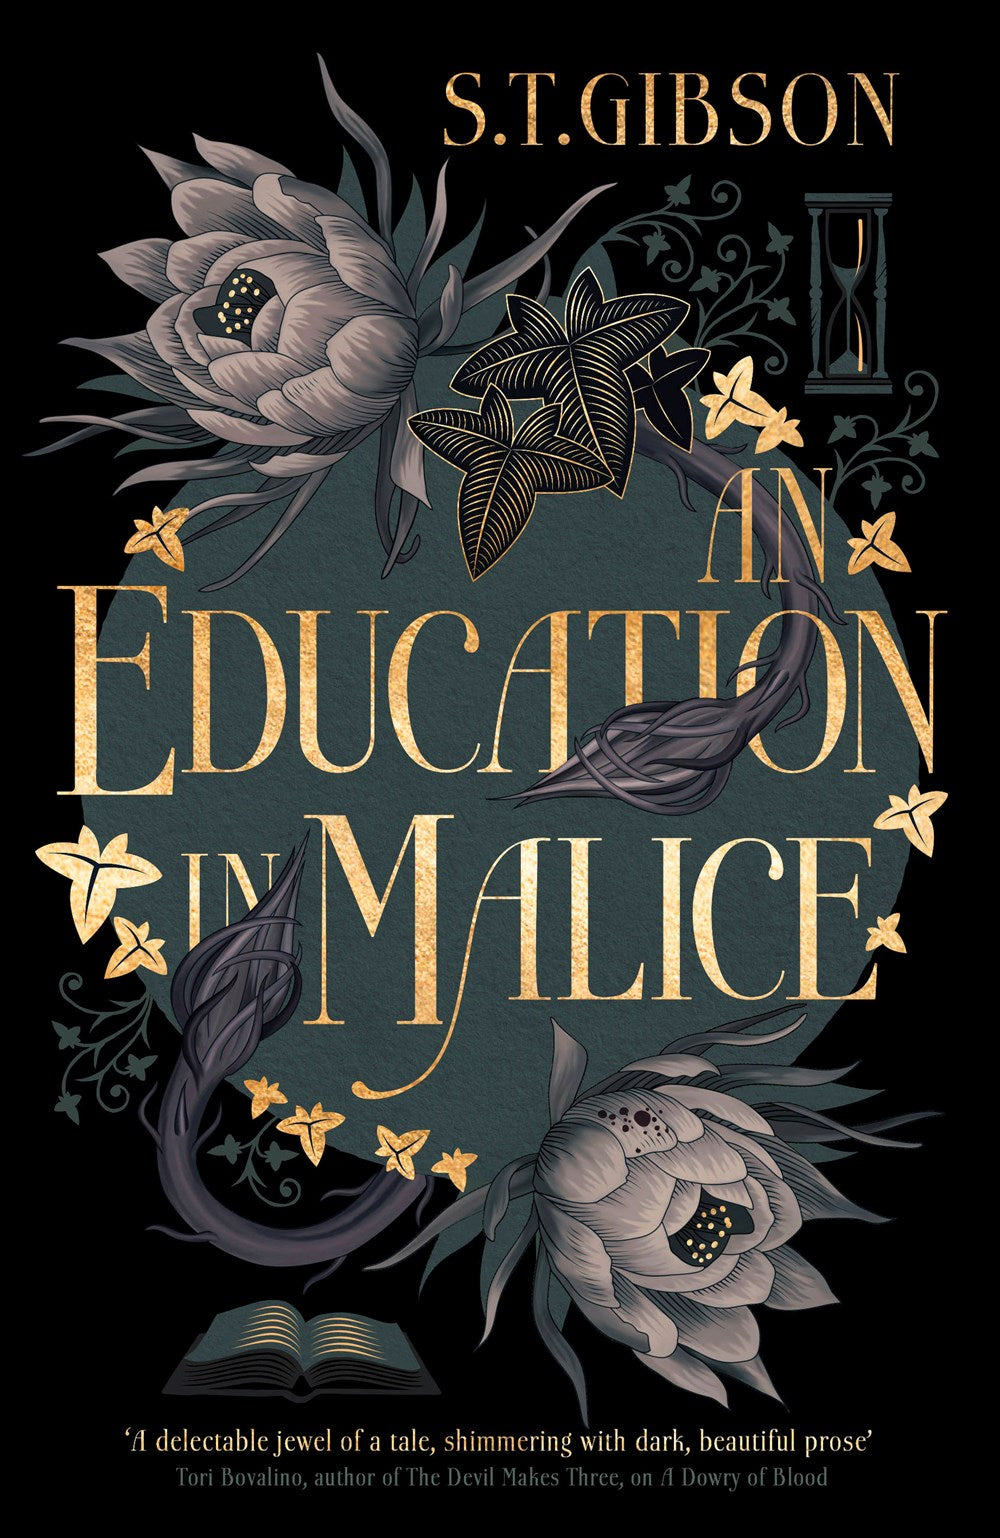 An Education in Malice - S. T. Gibson